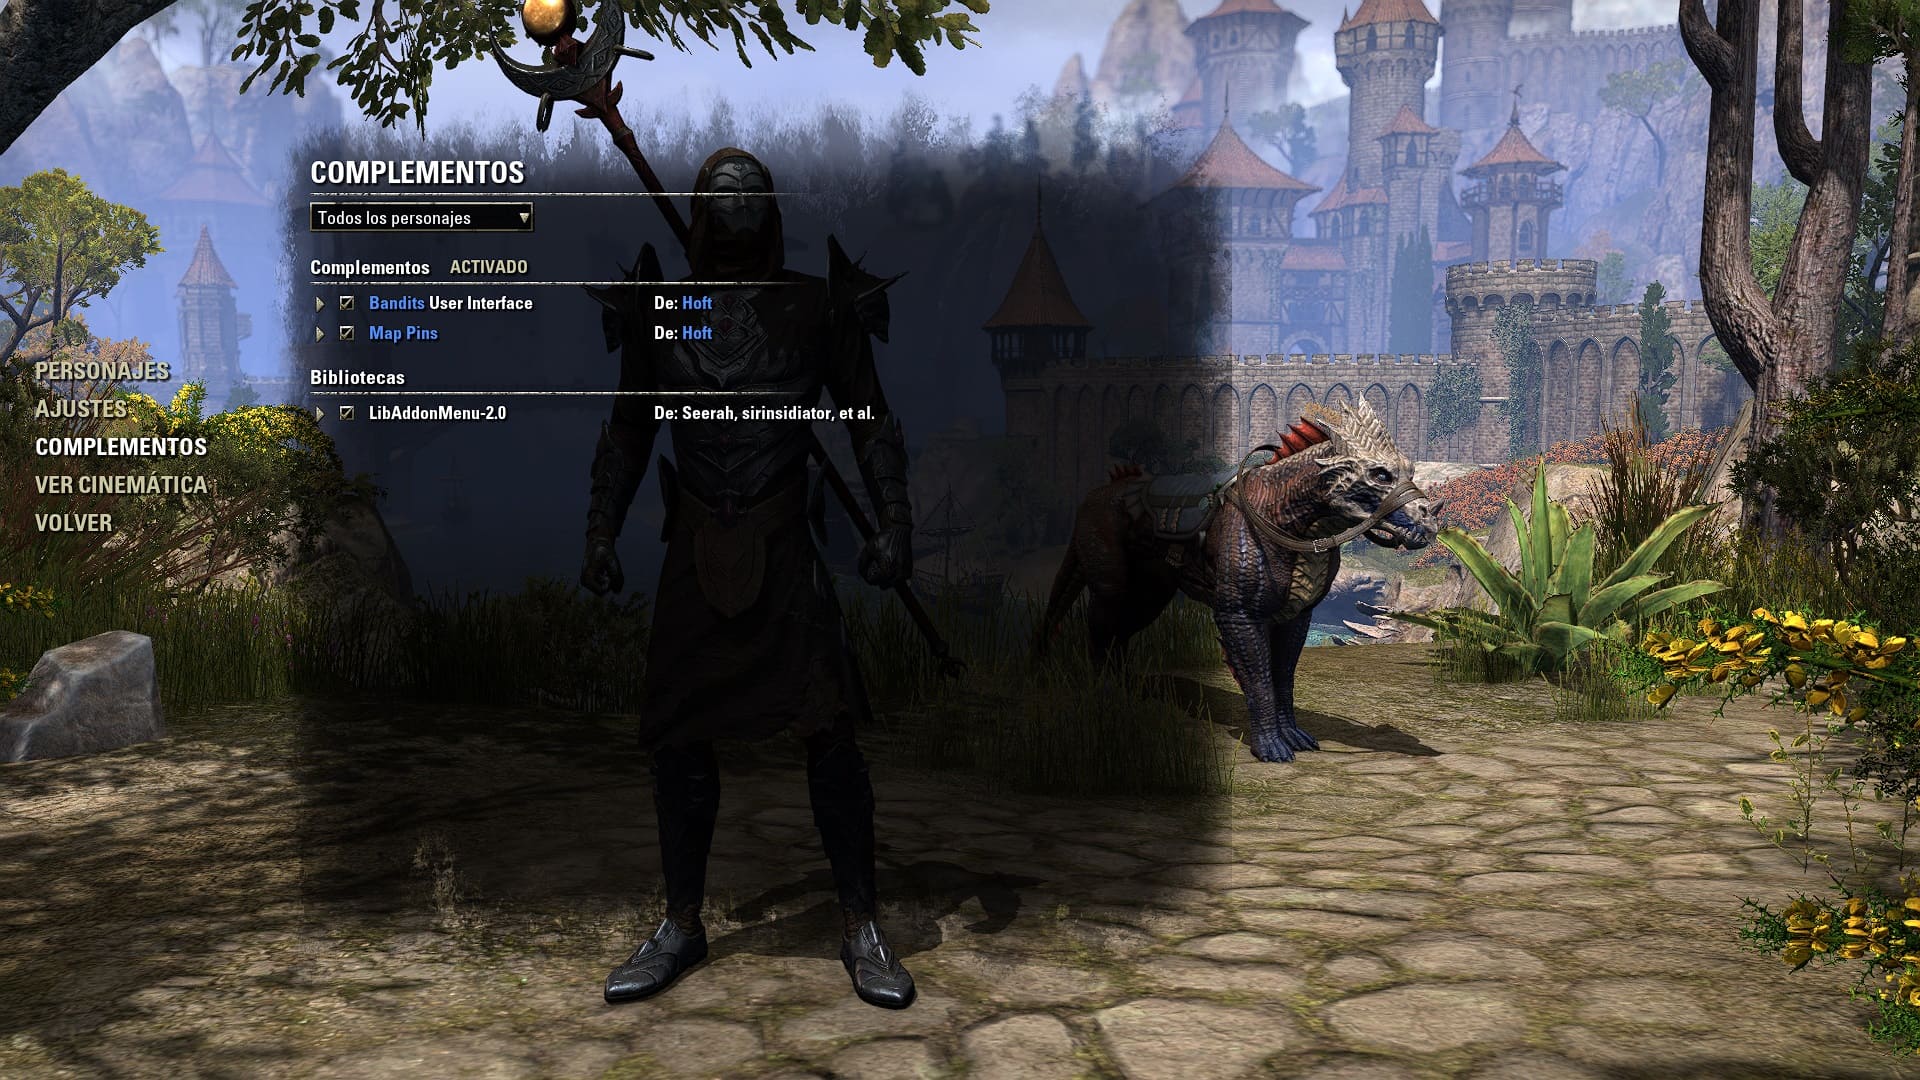 Essential Addons if you play The Elder Scrolls Online on PC - I bring you a list of essential addons for every Elder Scrolls Online player on PC, and none of them clutter the interface.